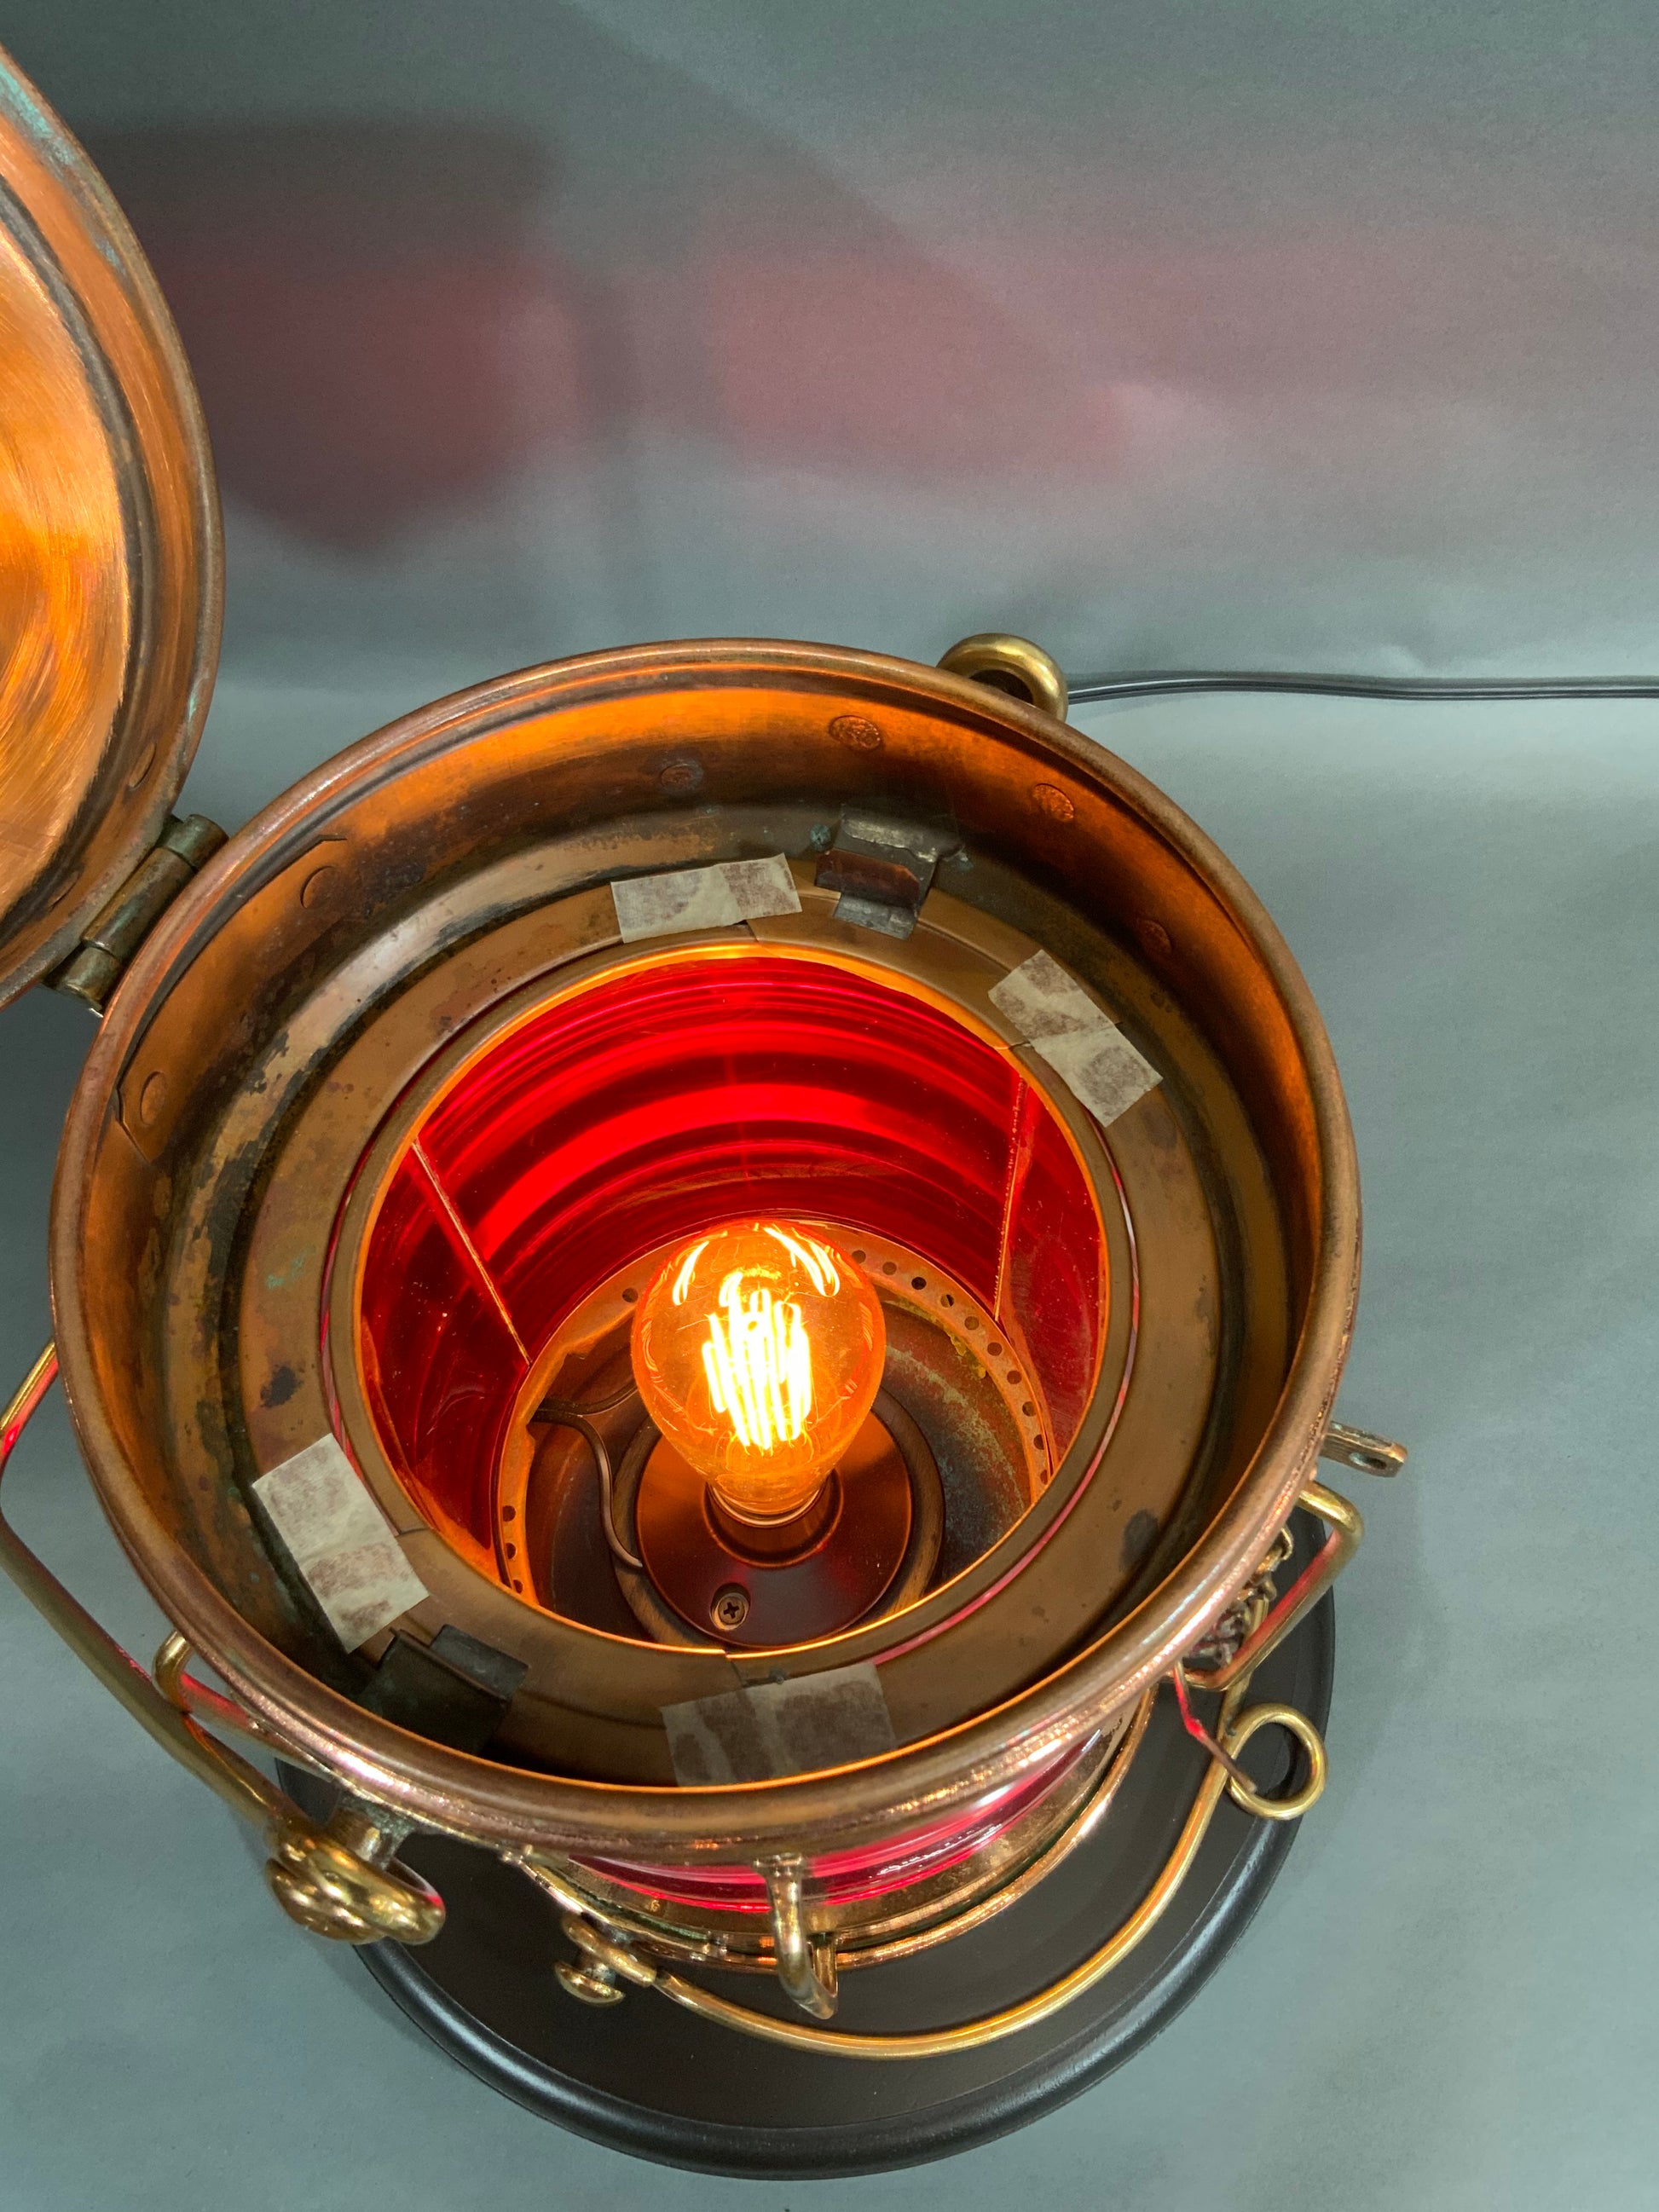 Copper "Not Under Command" Ship's Lantern with Glass Fresnel Lens by Meteorite - Lannan Gallery